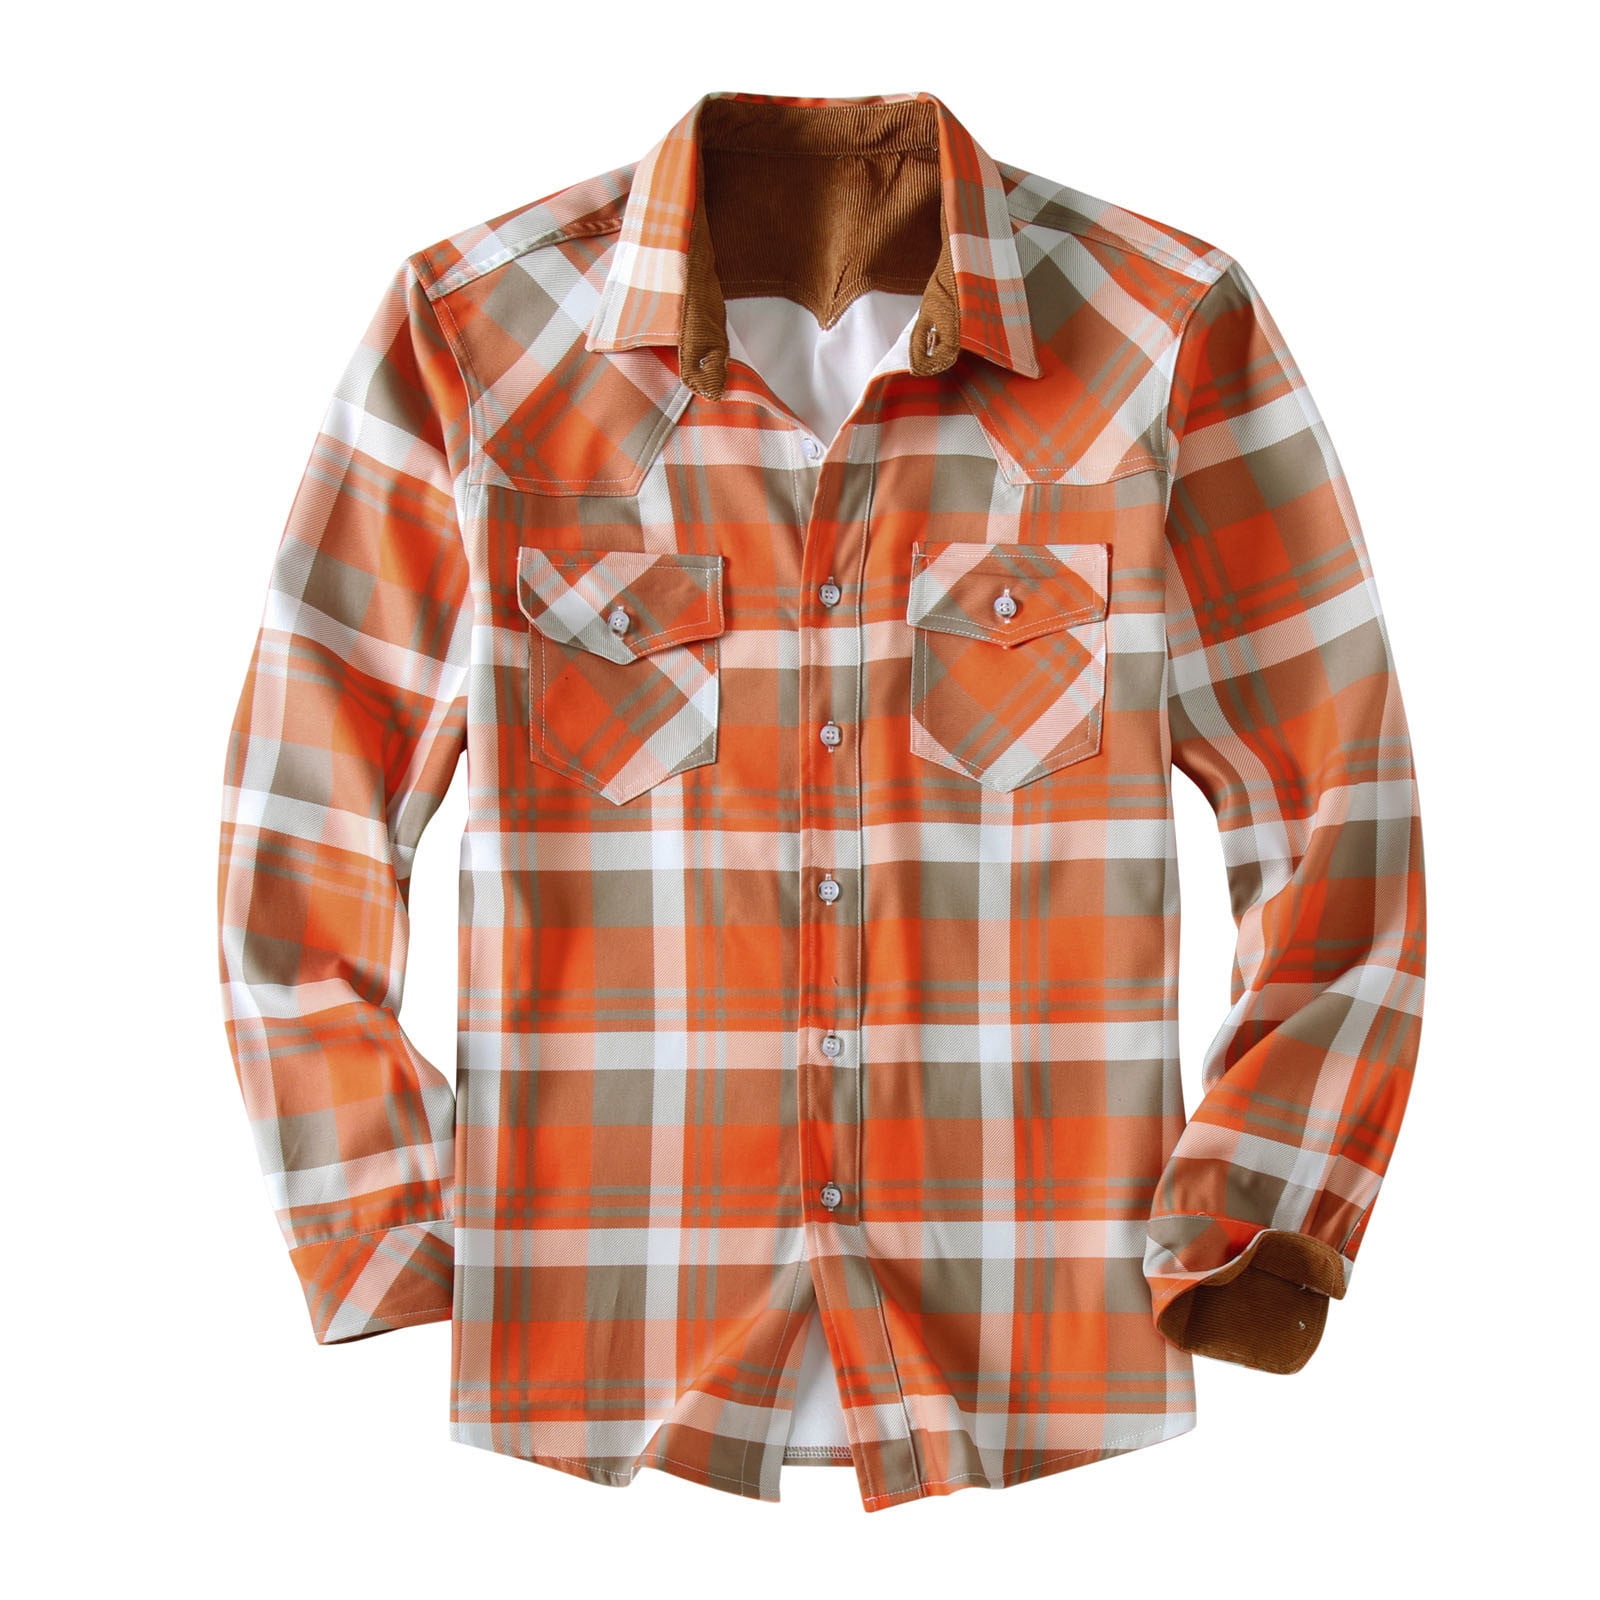 YYDGH Flannel Shirt for Men Long Sleeve Casual Button-Down